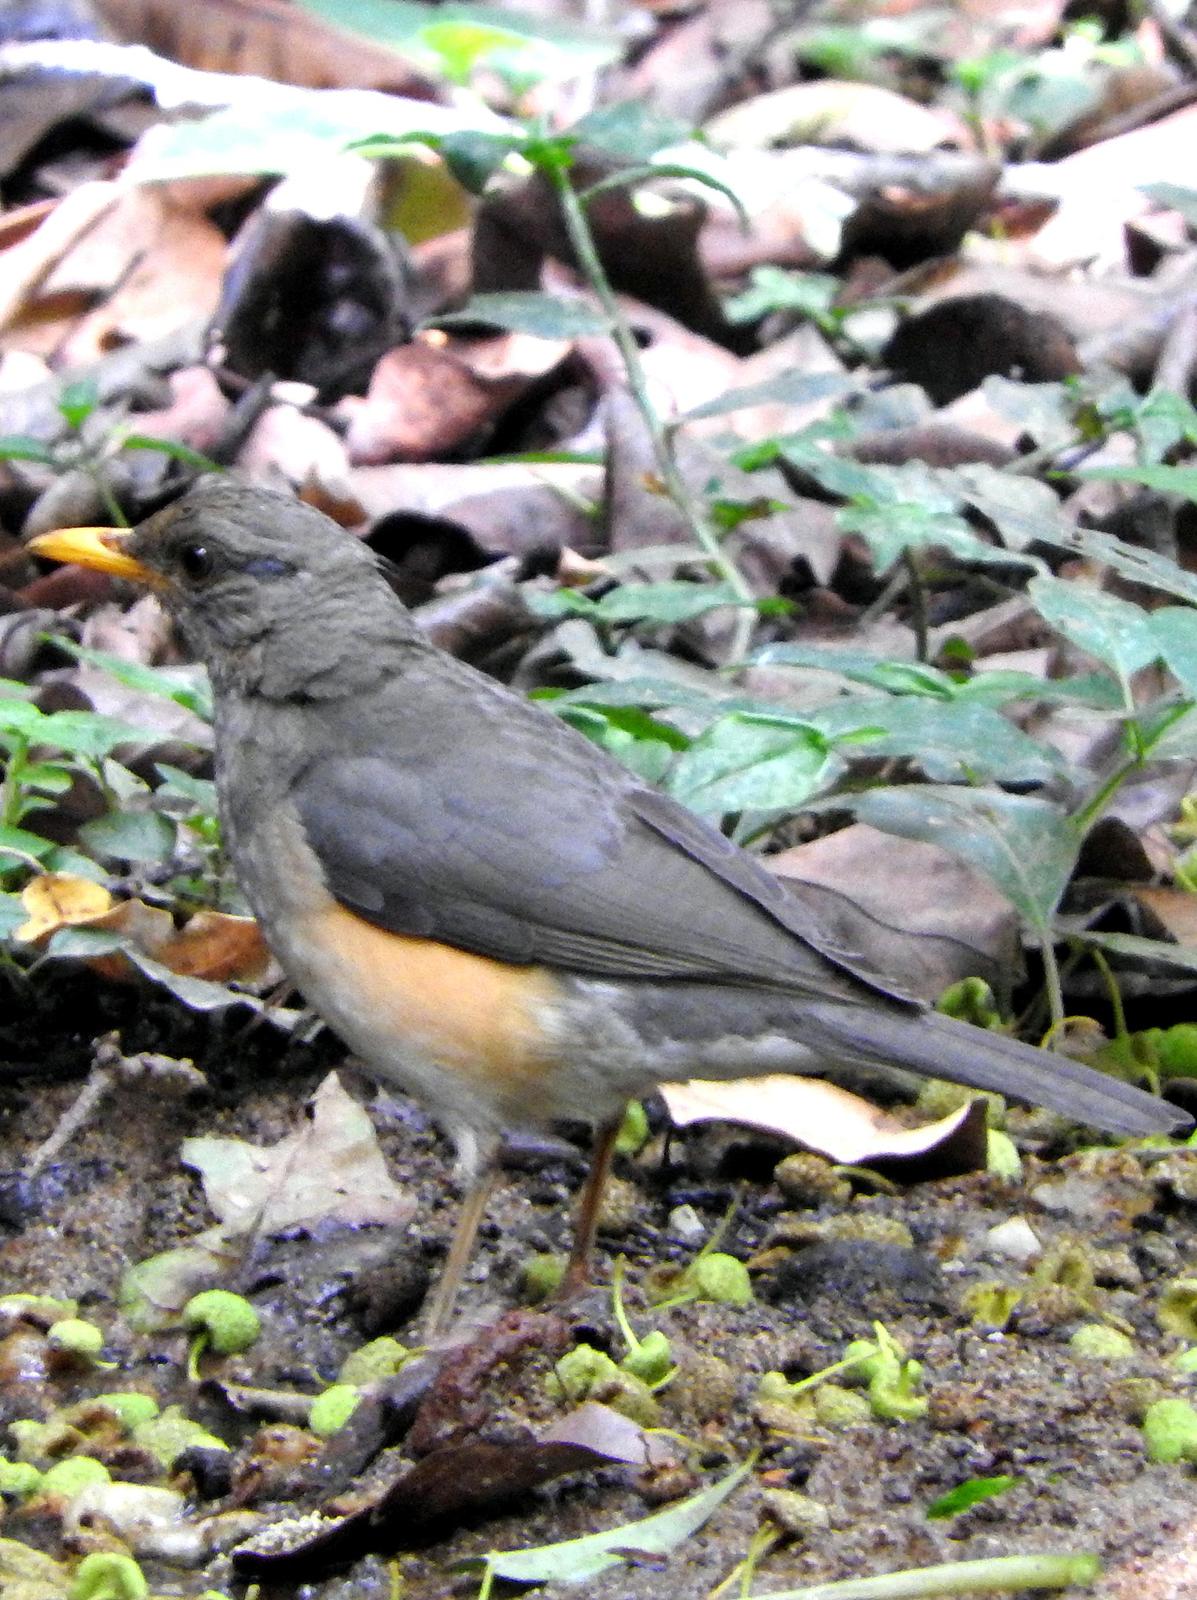 African Thrush Photo by Todd A. Watkins